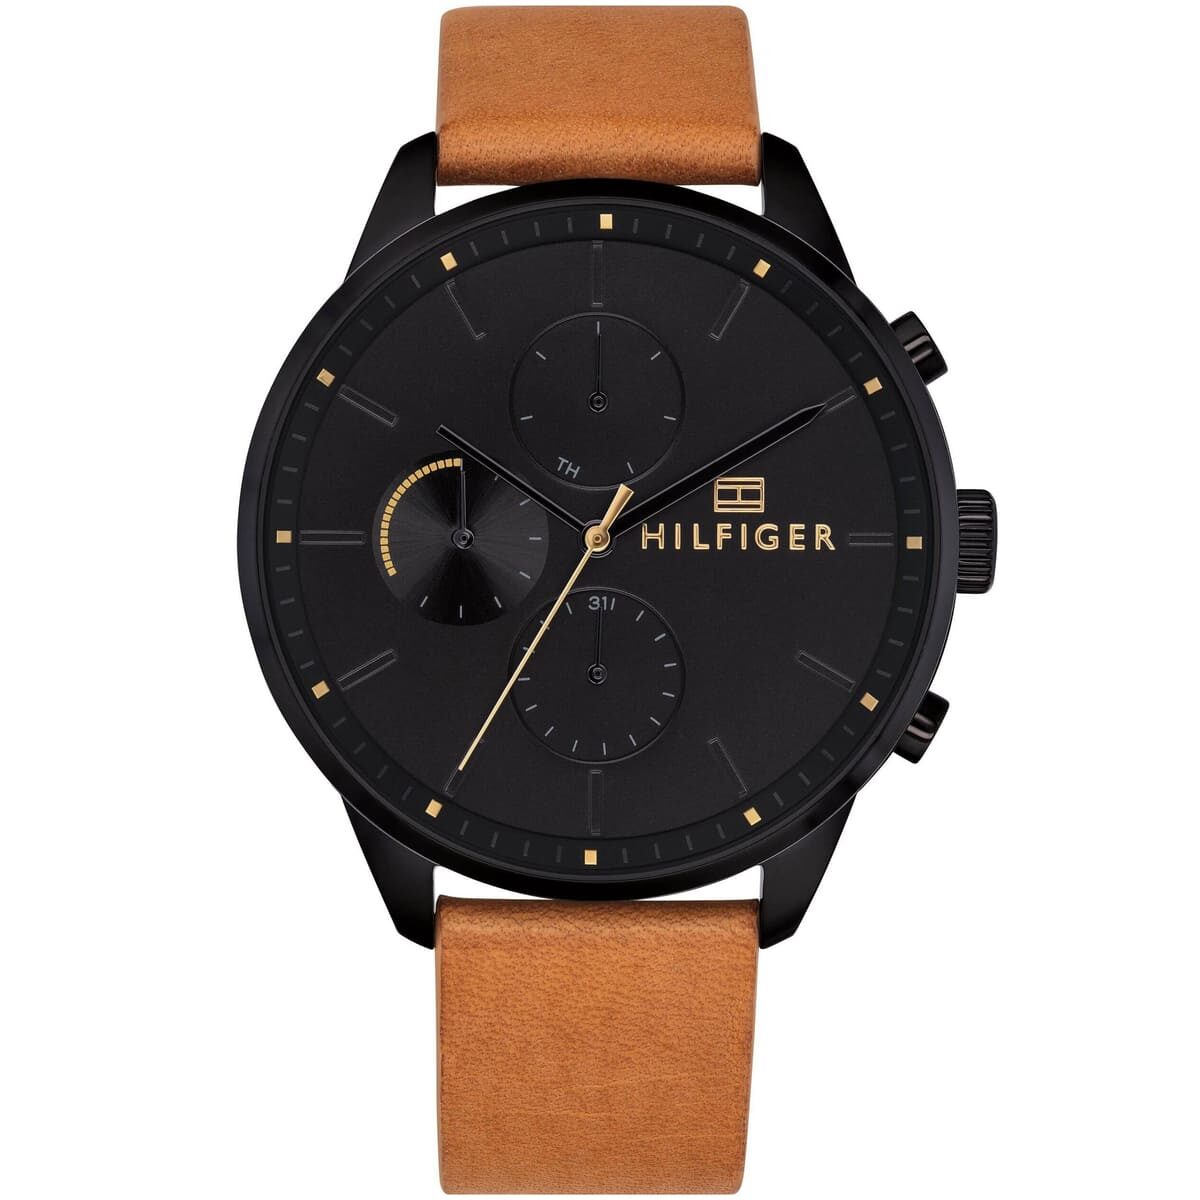 1791486-tommy-hilfiger-watch-men-black-dial-leather-brown-strap-quartz-analog-day-date-month-chase